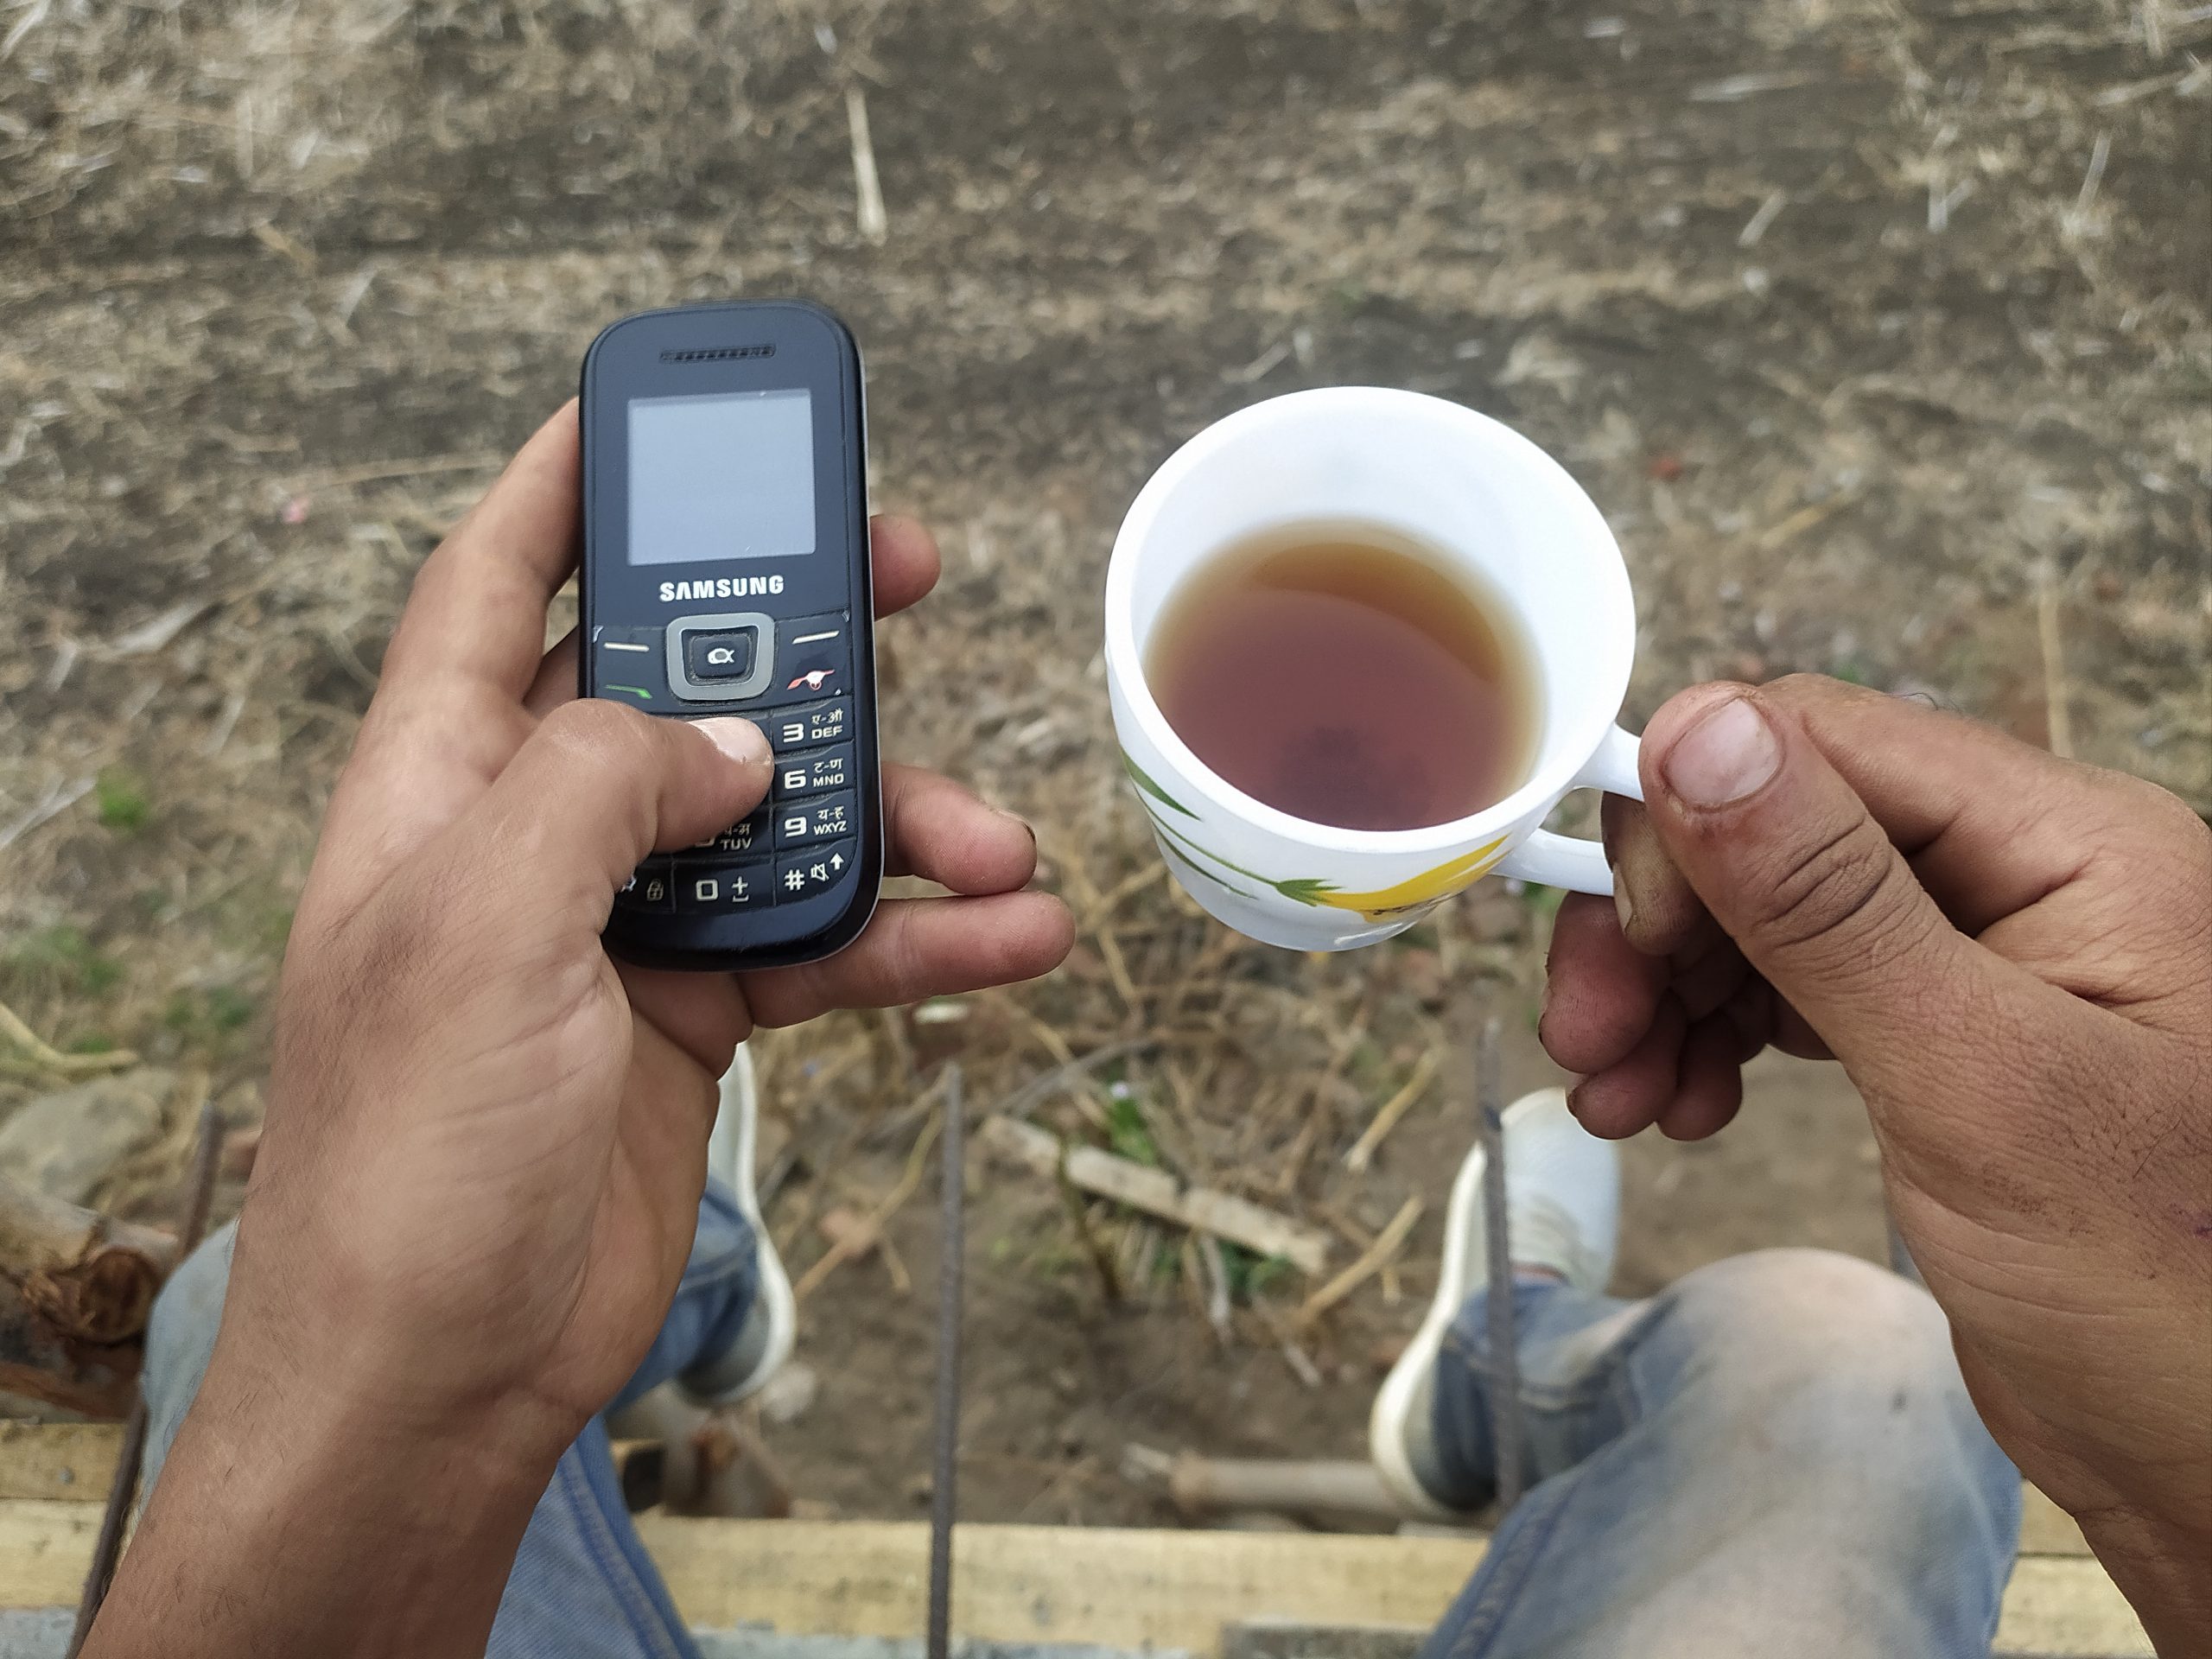 A keypad phone and tea cup in hands